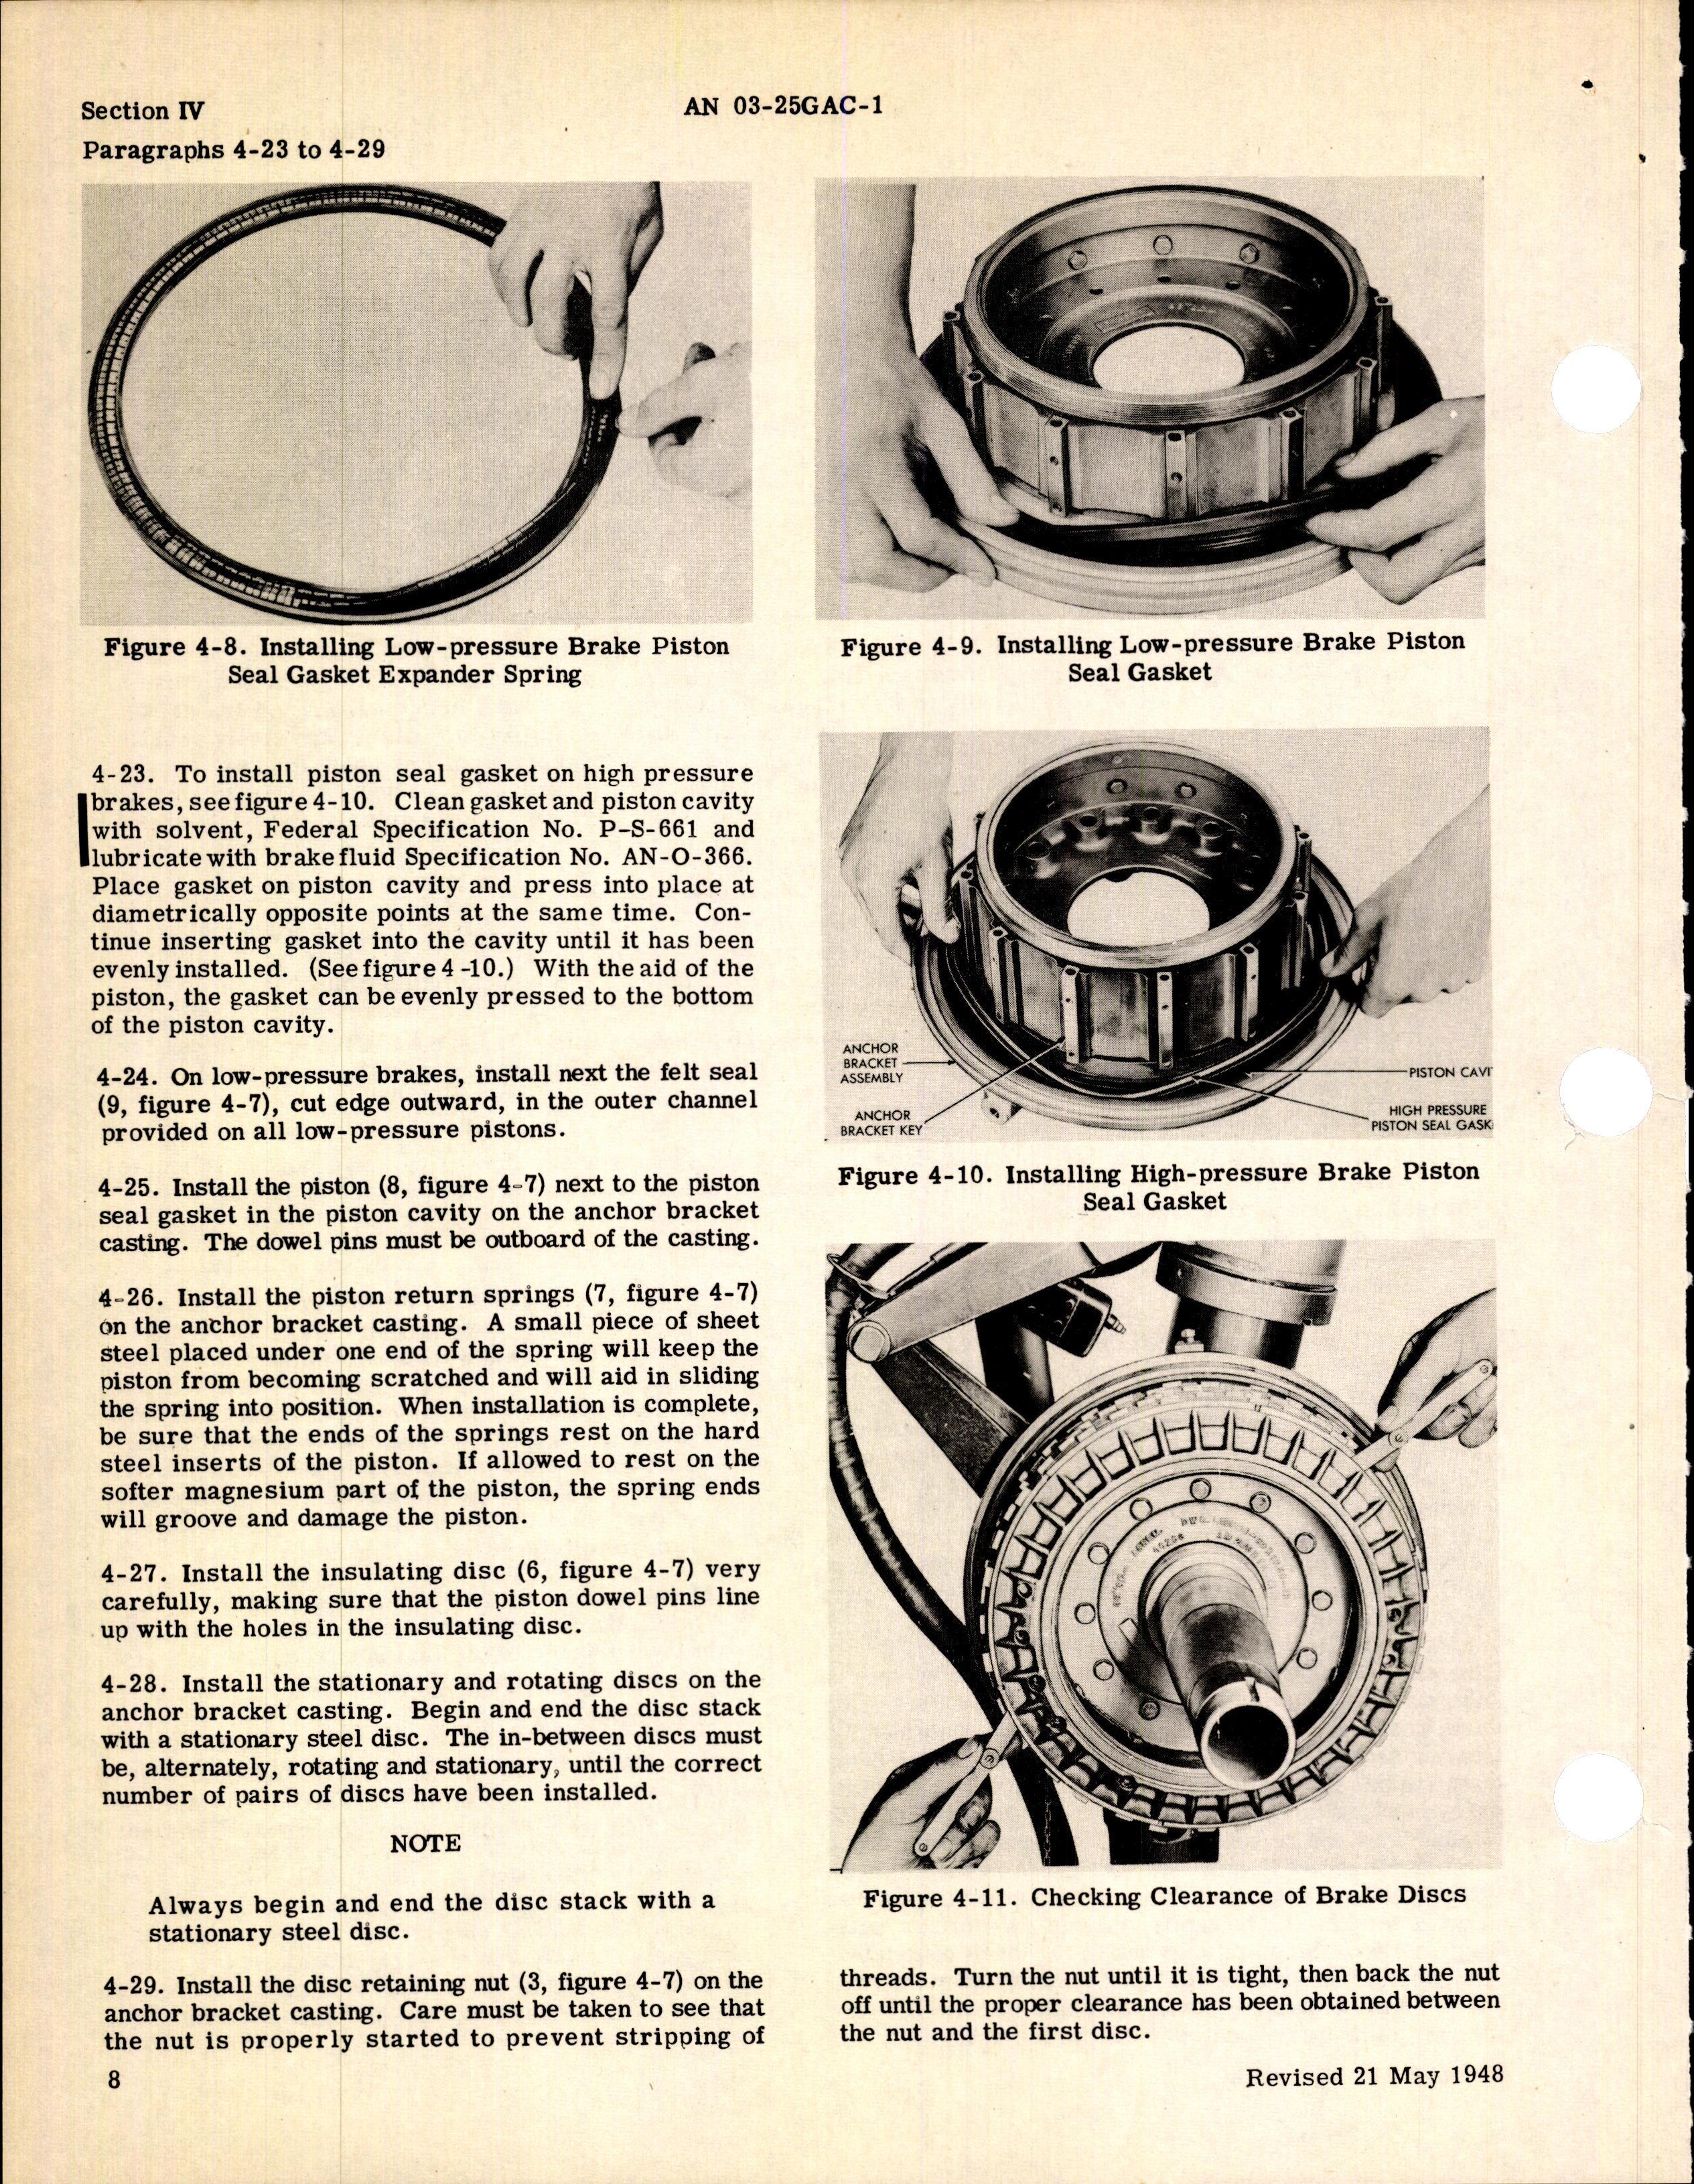 Sample page 16 from AirCorps Library document: Handbook Overhaul Instructions for Multiple Disc Brakes (Goodyear)